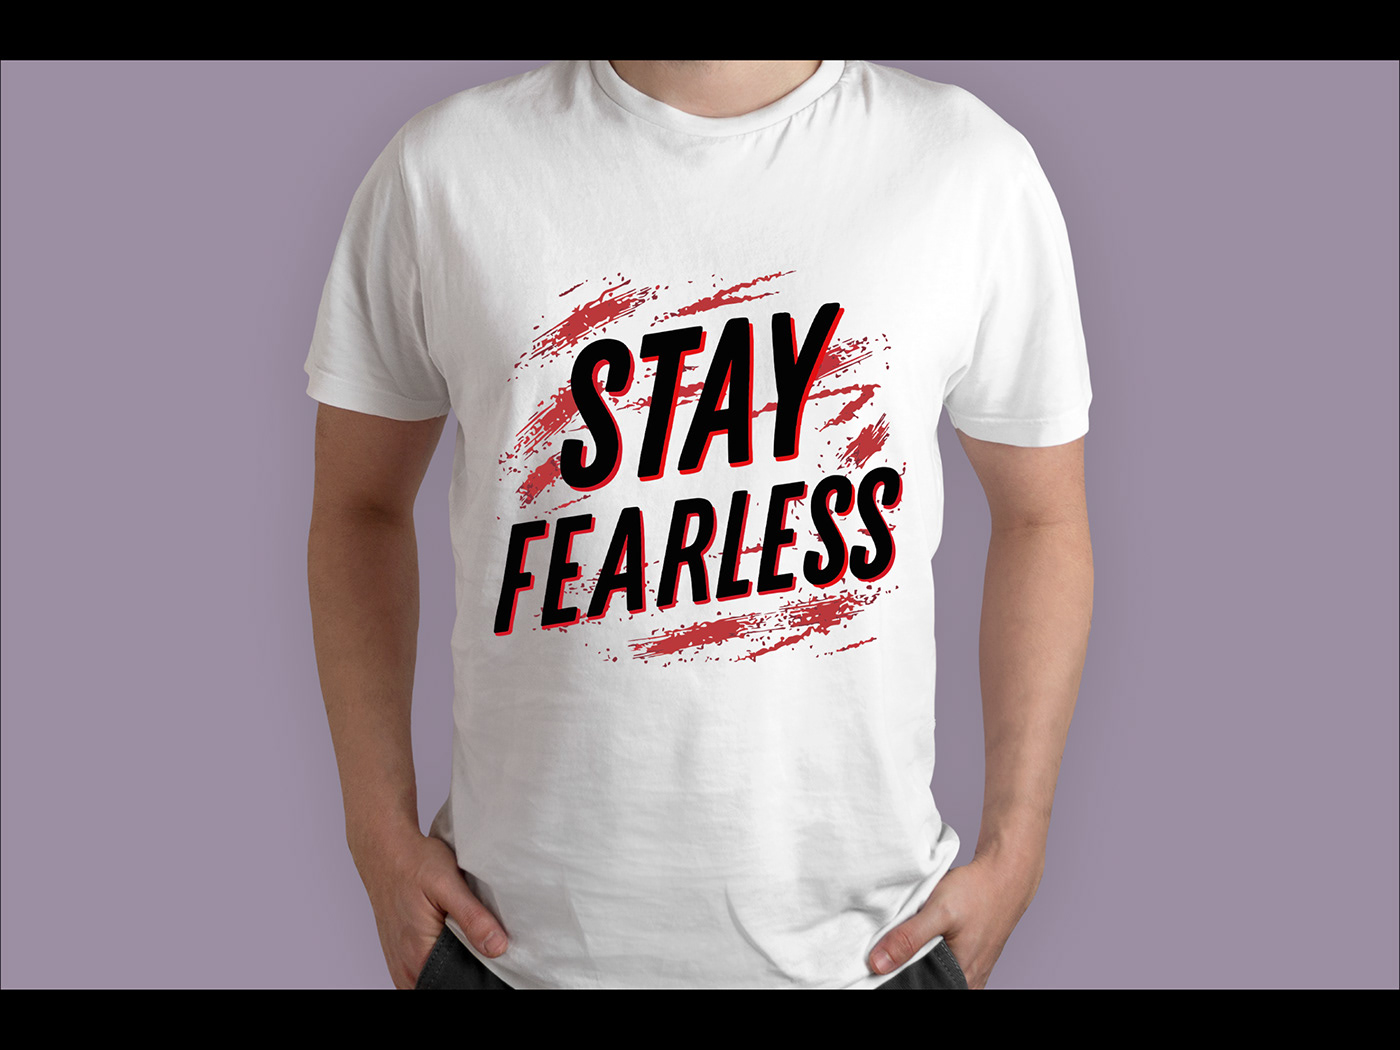 Clothing t-shirt typography   text motivation inspiration Quotes phrases Fashion  design